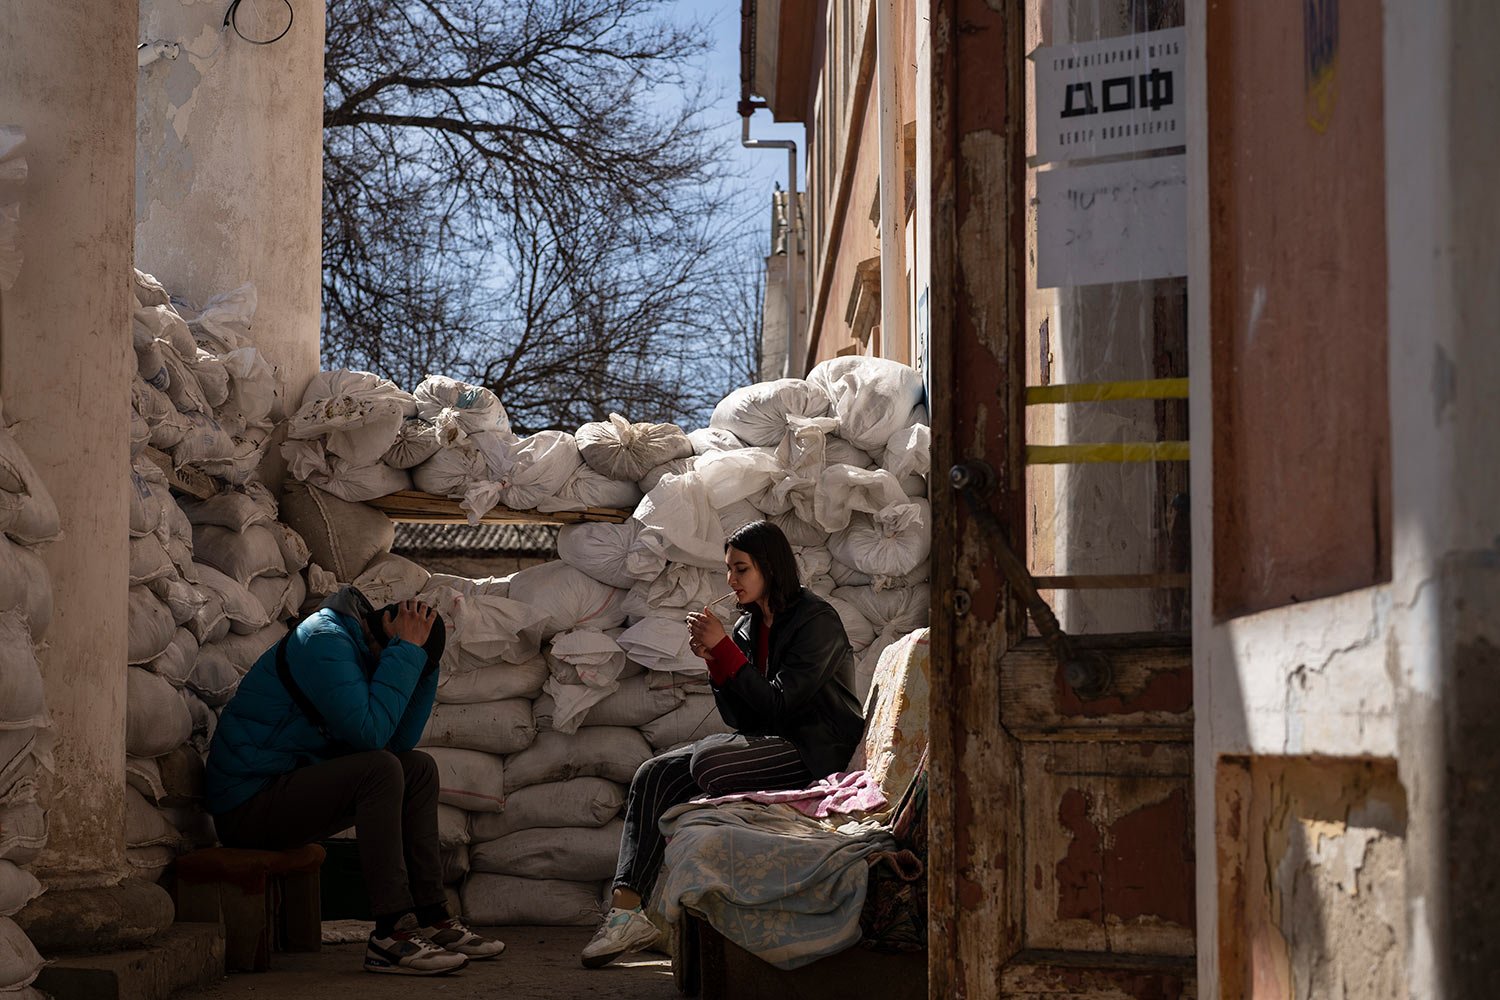  A volunteer smokes next to sandbags used for protection, at a Ukrainian volunteer center in Mykolaiv, southern Ukraine, on Monday, March 28, 2022. (AP Photo/Petros Giannakouris) 